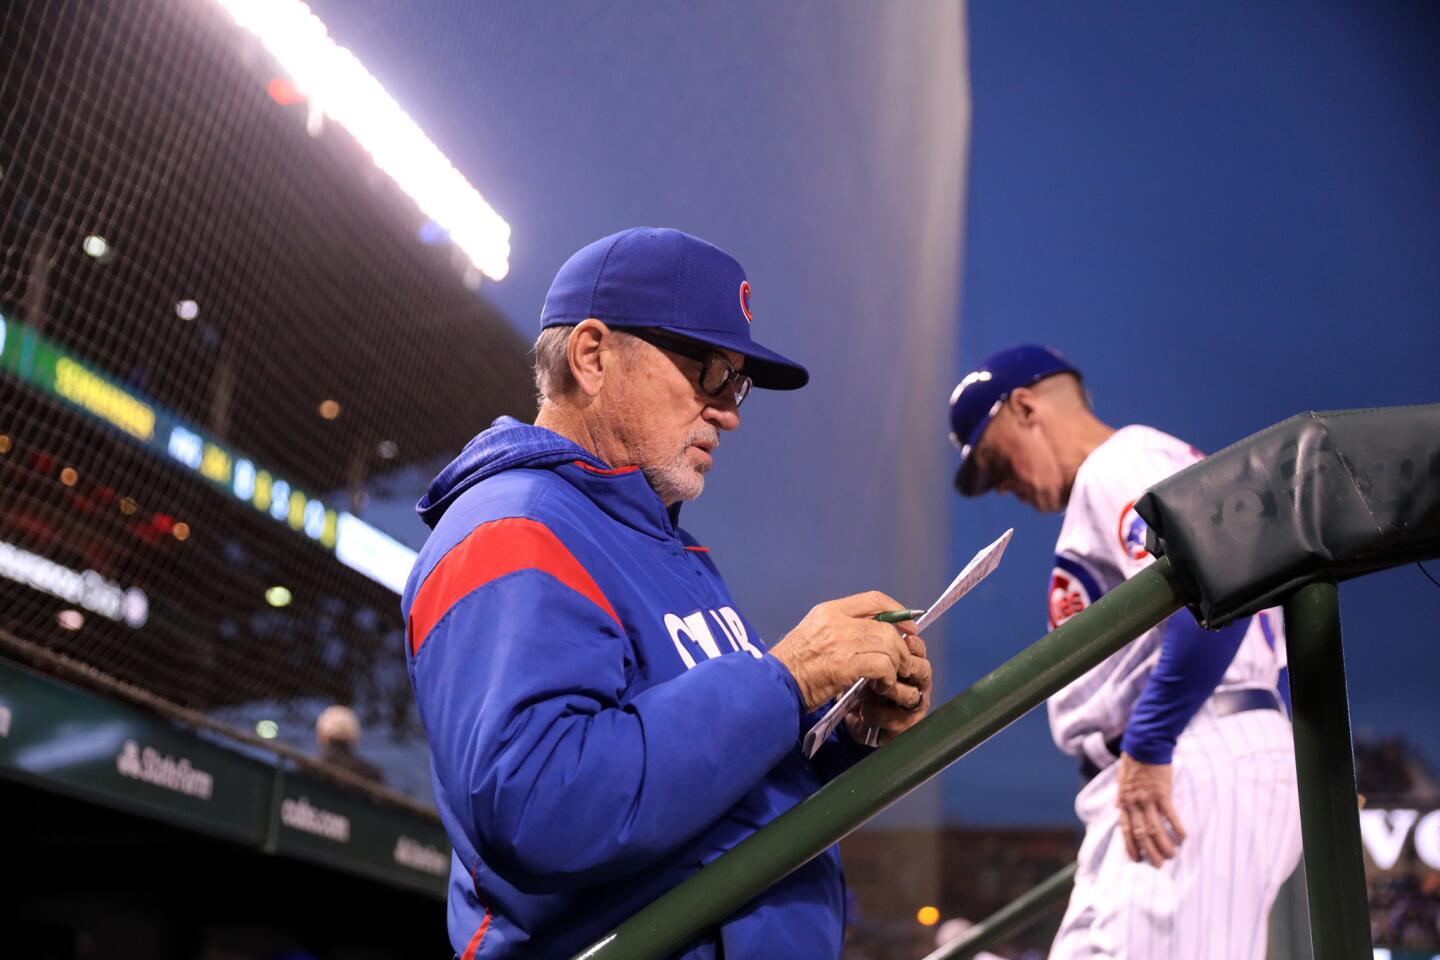 Cubs manager Joe Maddon stands in the dugout in the seventh inning of a game against the Brewers at Wrigley Field on Thursday, April 26, 2018.